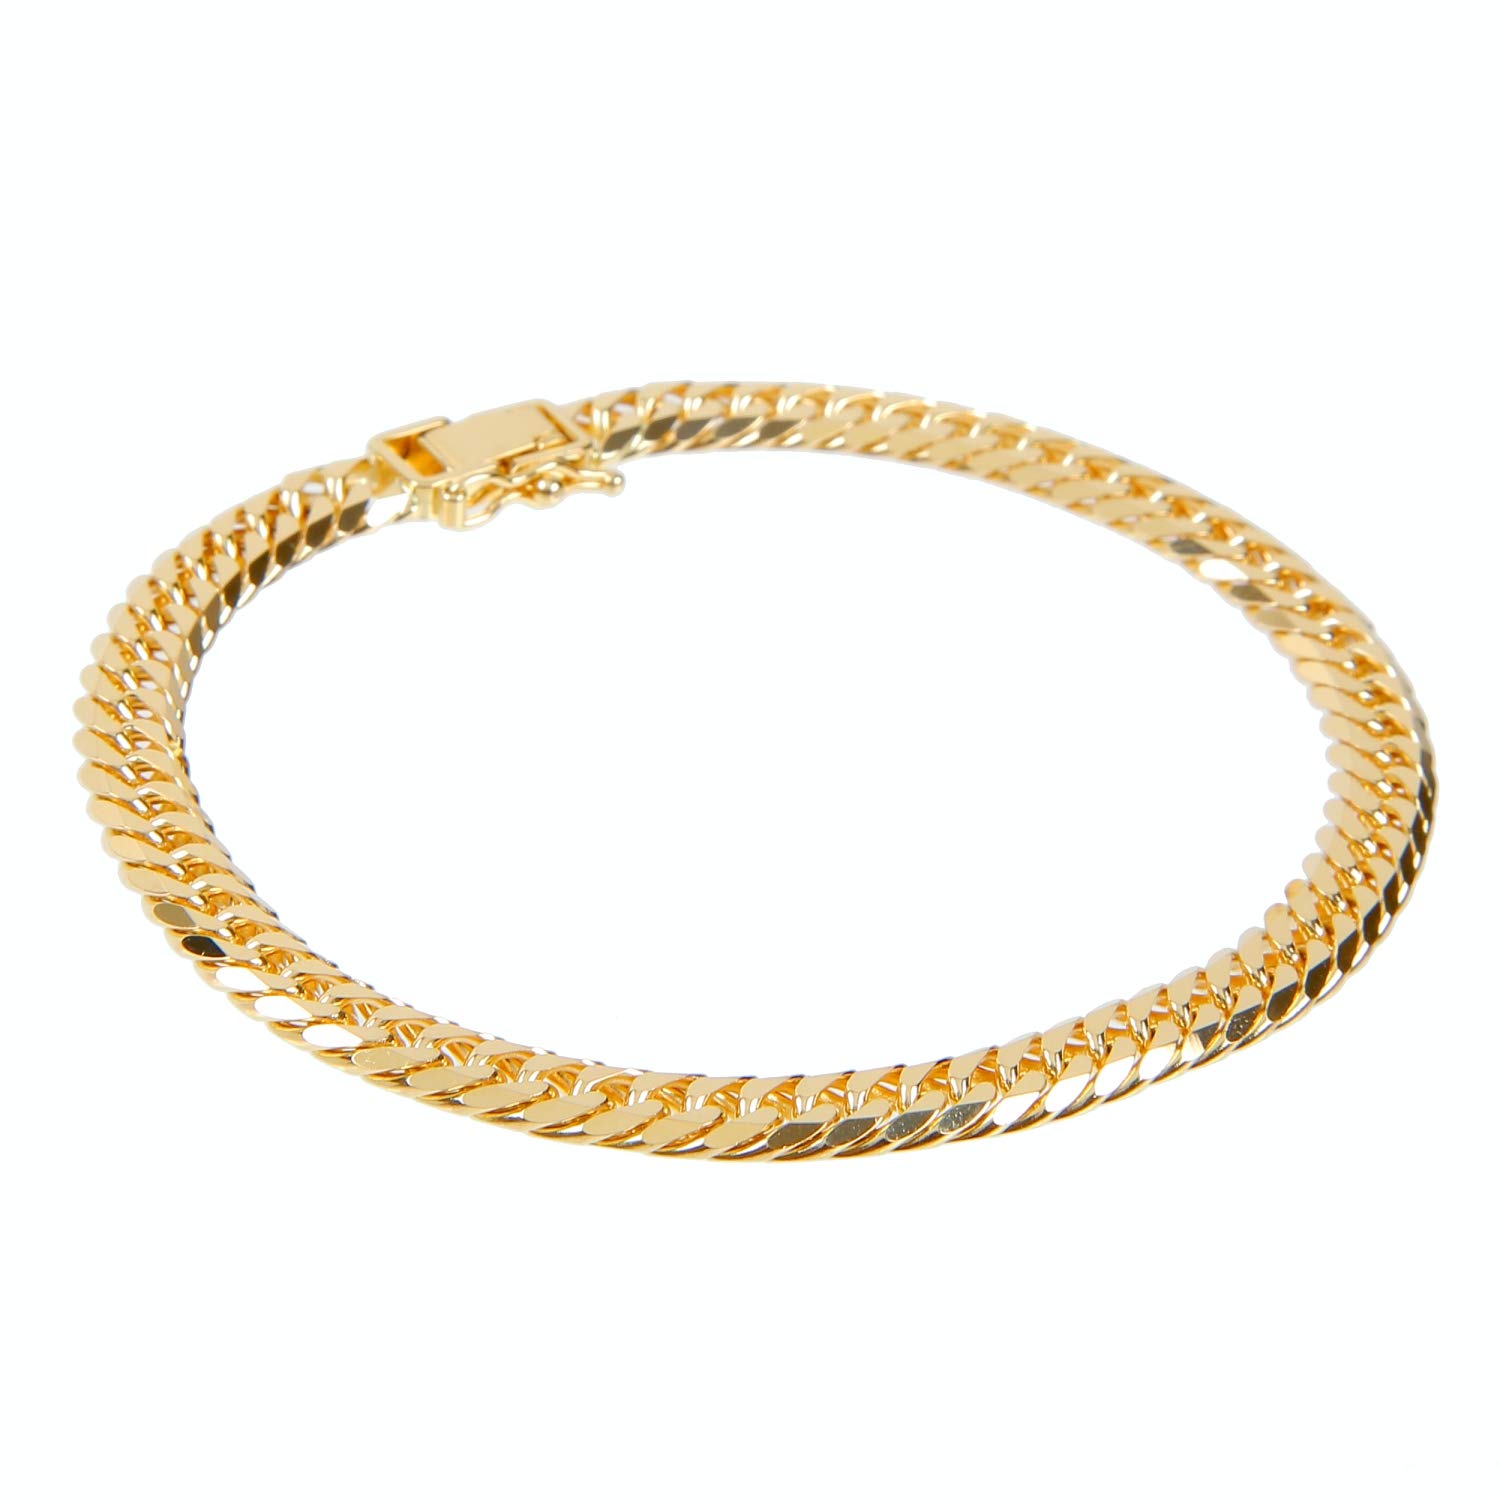 Amazon.com: Miabella 18K Gold Over Sterling Silver Italian 5mm Mesh Link  Chain Bracelet for Women, 925 Made in Italy (Length 6.5 Inches (X-Small)):  Clothing, Shoes & Jewelry